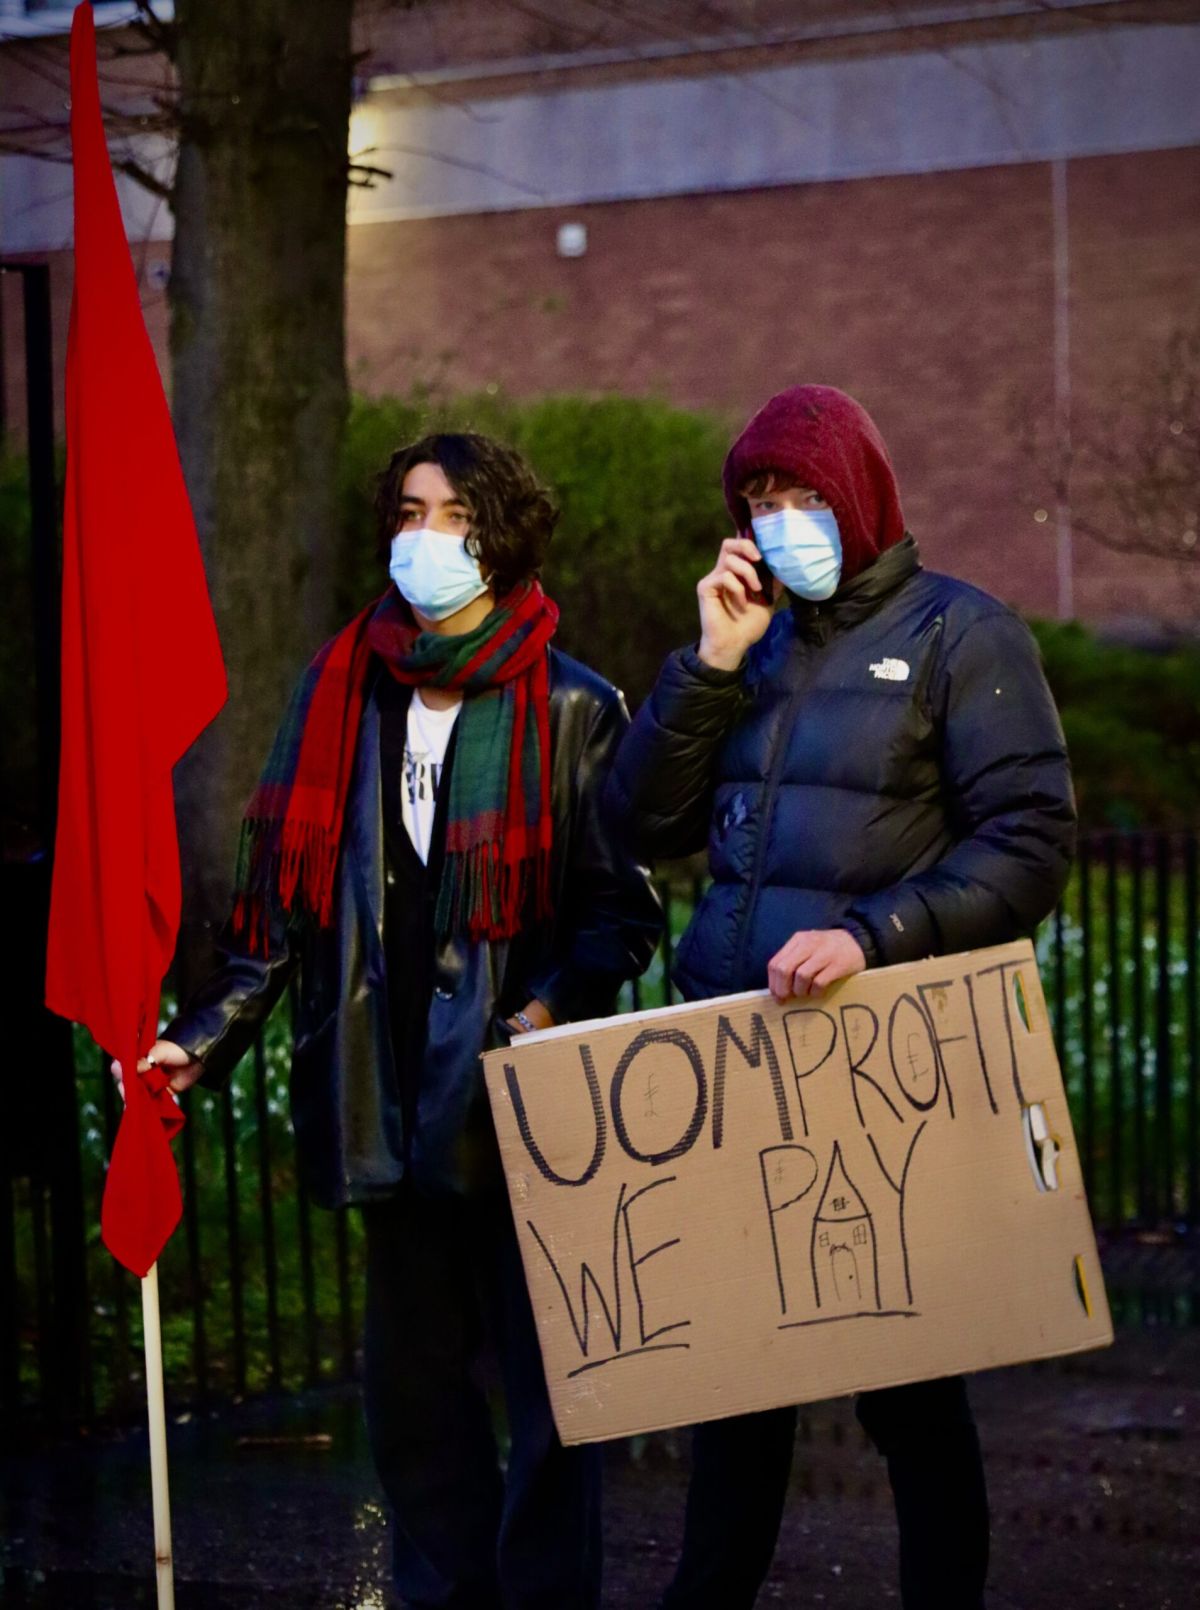 Rent Strikers and University alike fail to learn from history